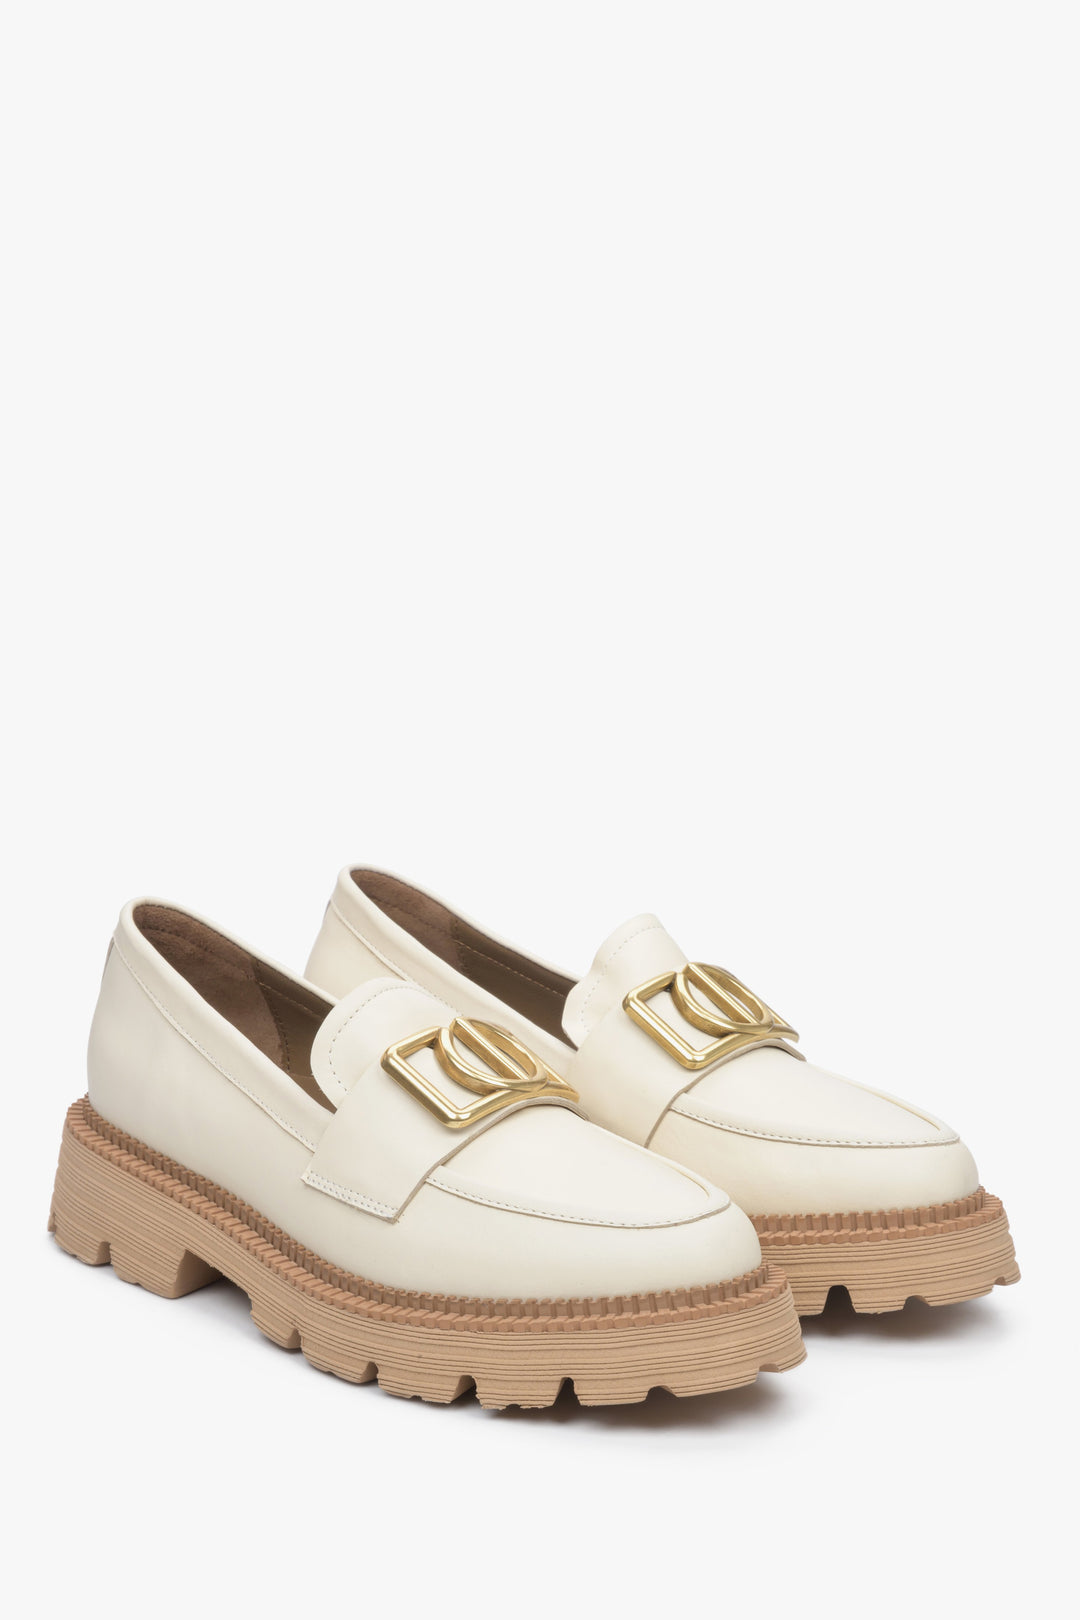 Women's light beige loafers on a chunky platform with gold chain.